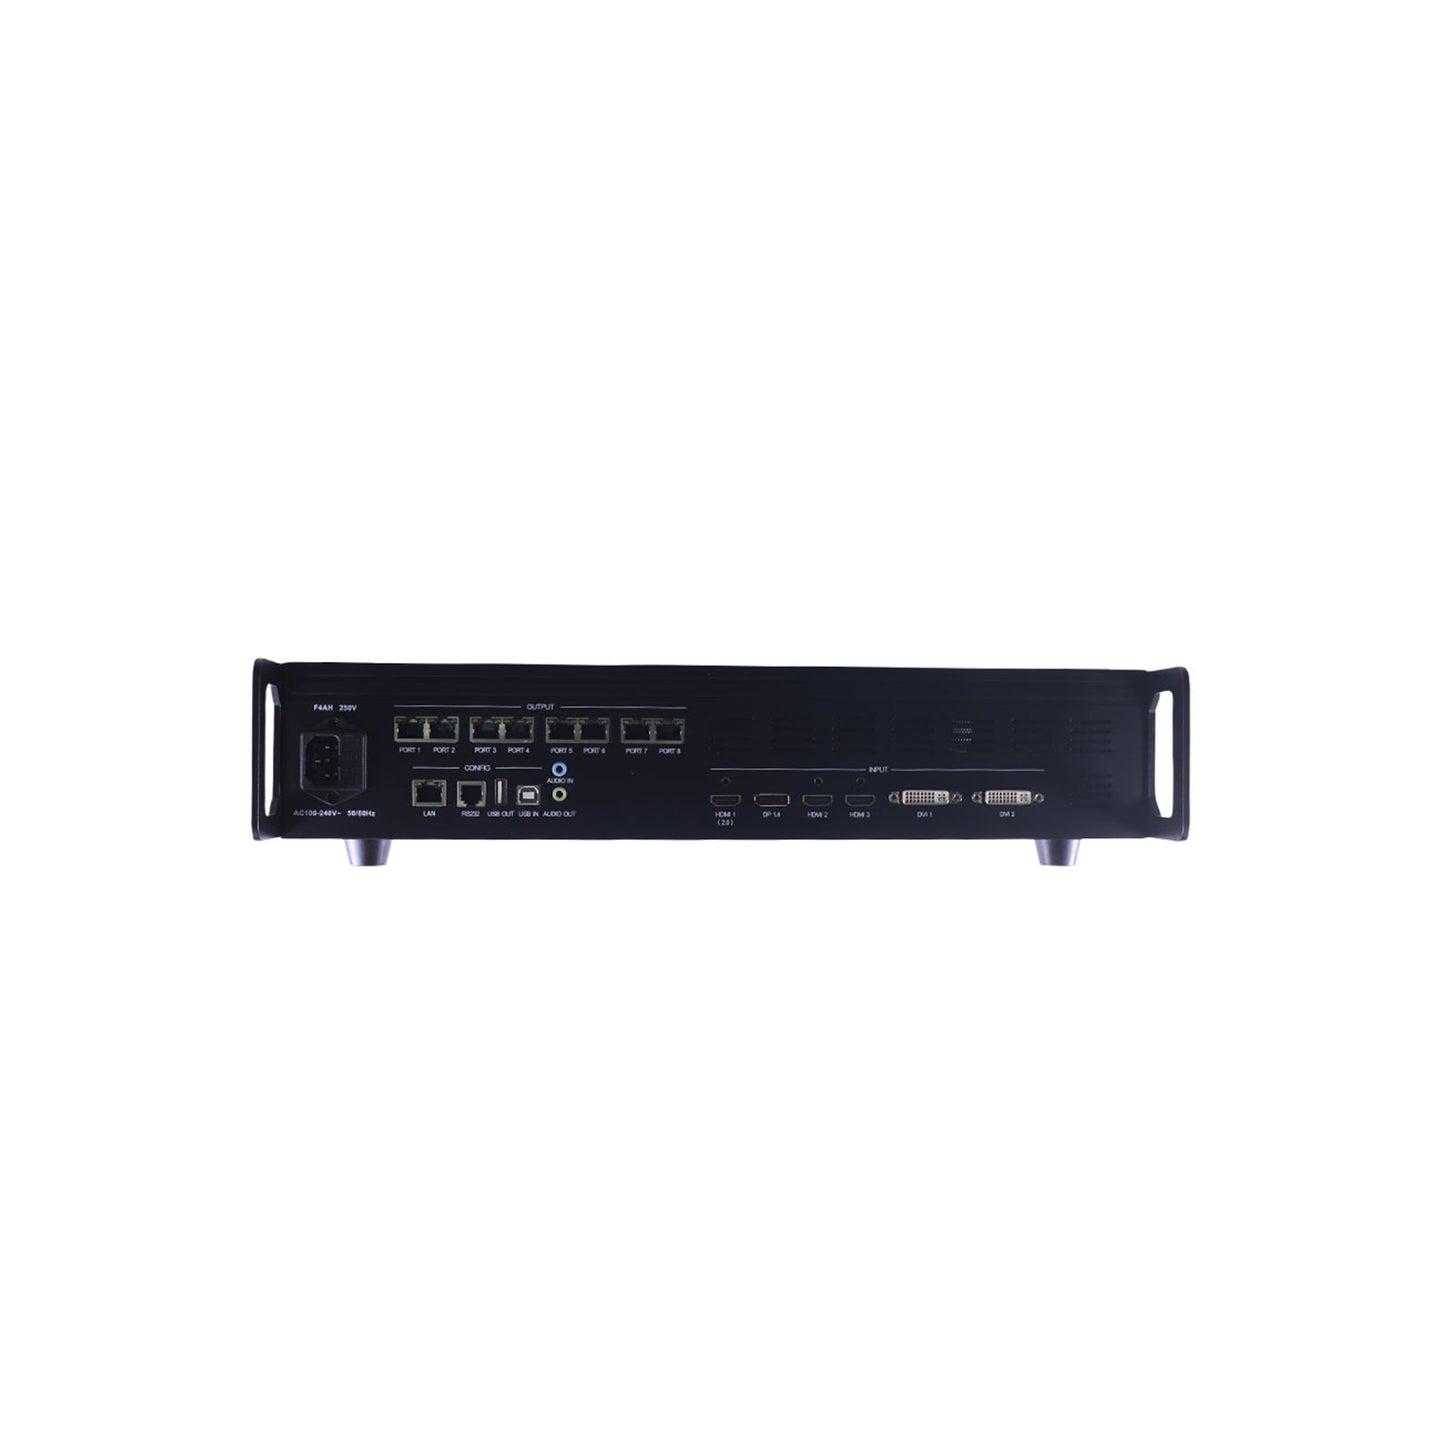 X8E Two-in-one LED Video Processor